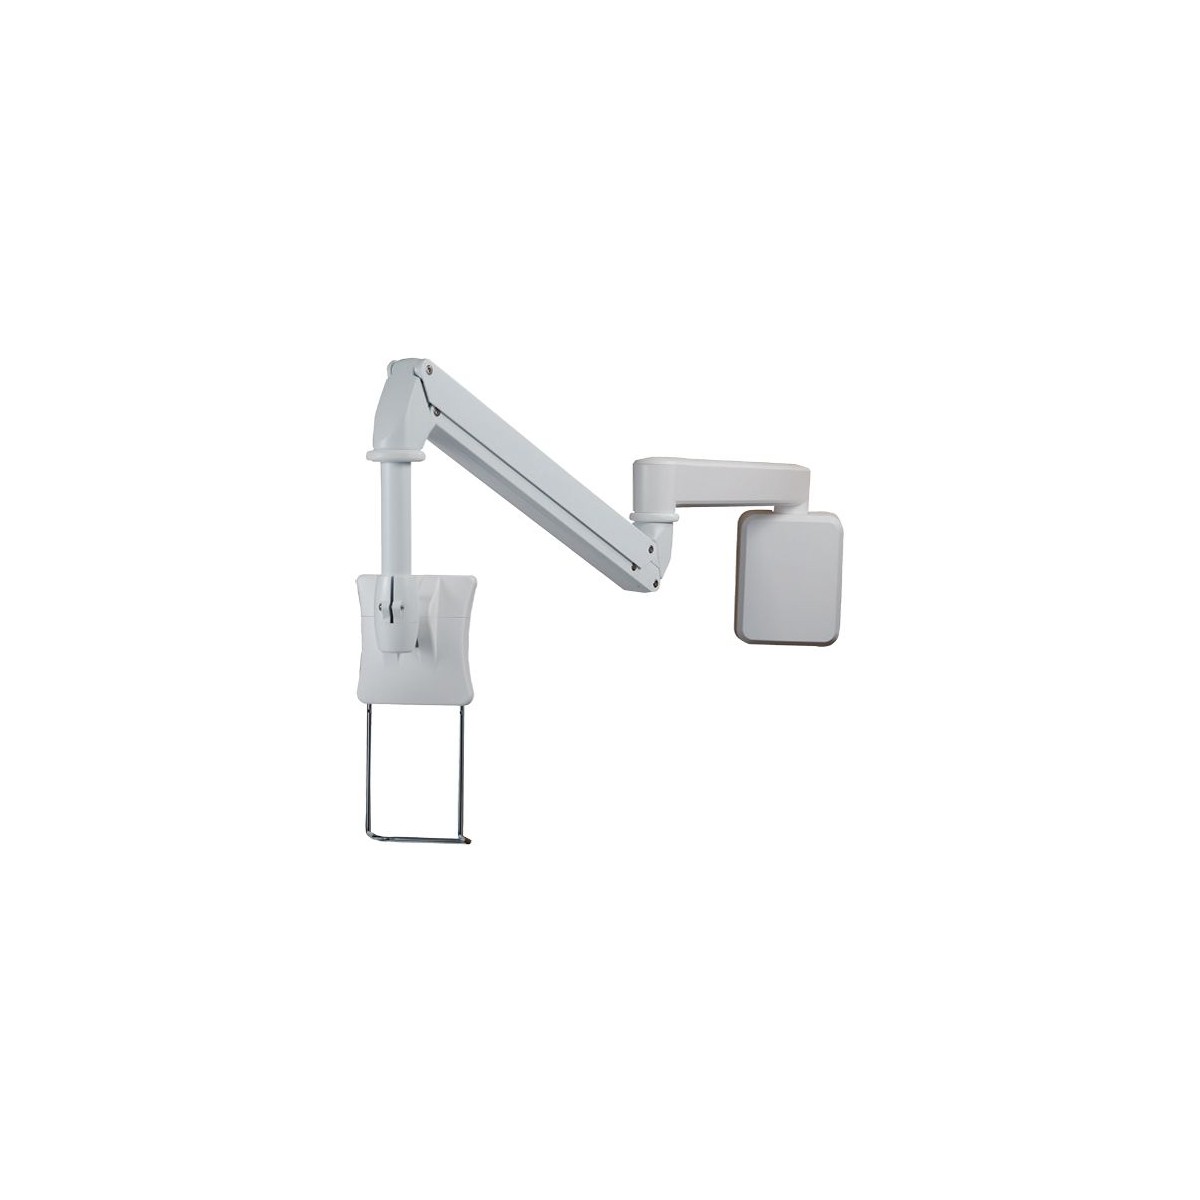 Aavara AMW20 Cantilever Medical ARM (Capacity 2.5-6.5kg) - Wall Mount Type